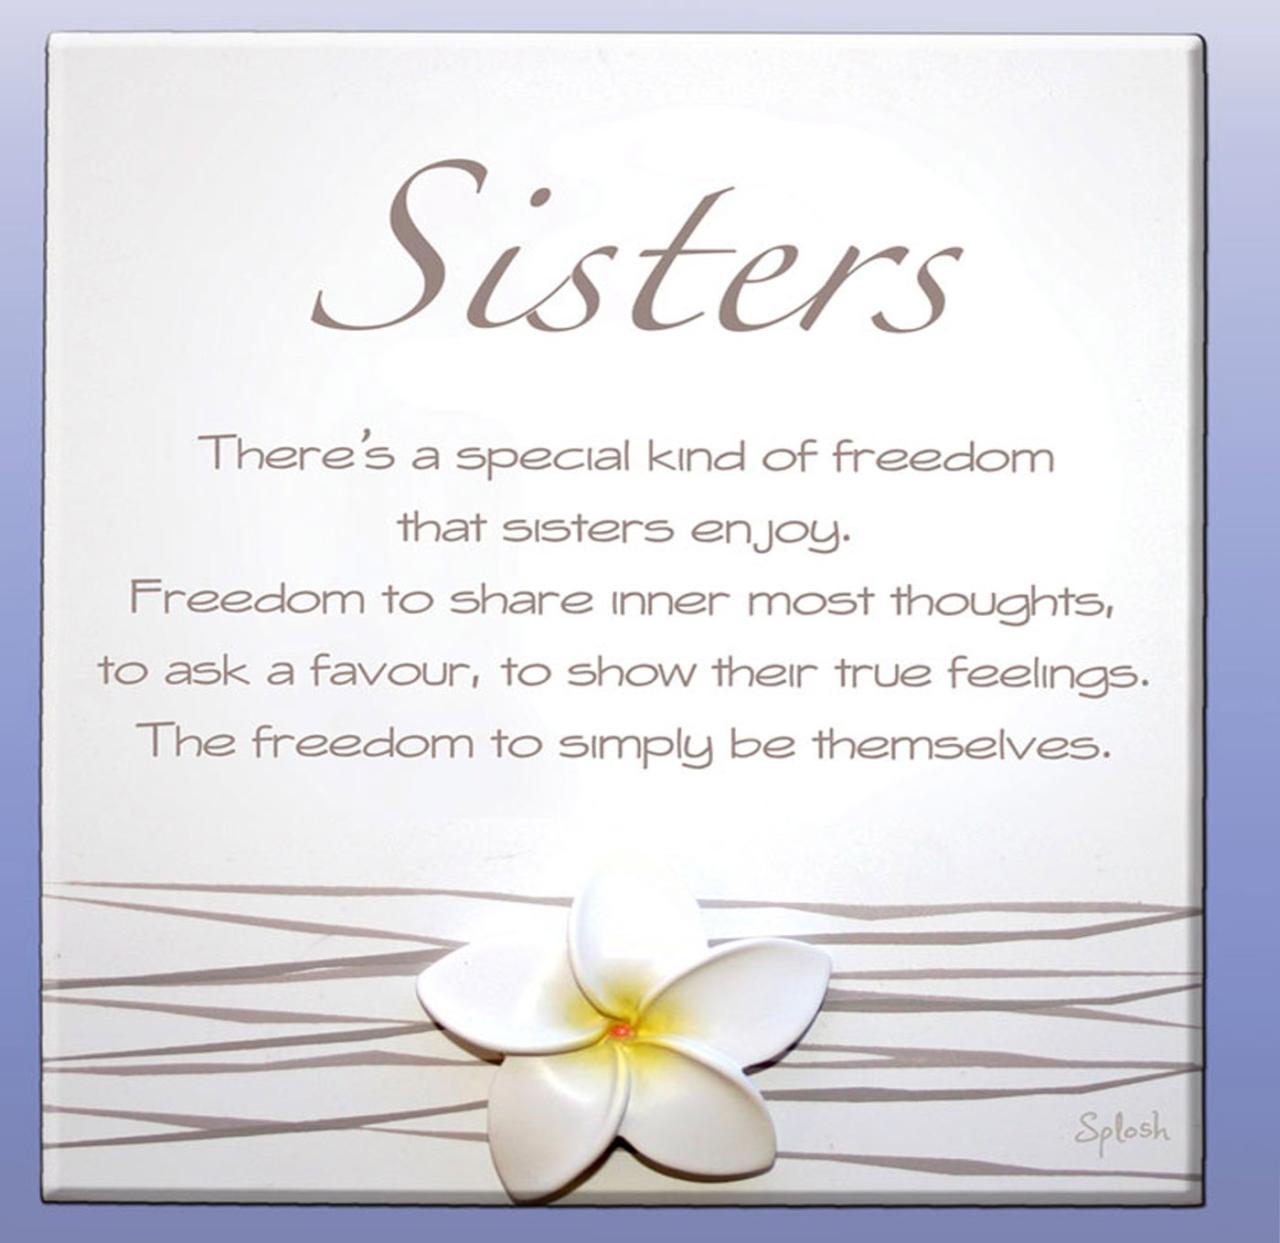 Sister sisters little family cards friends